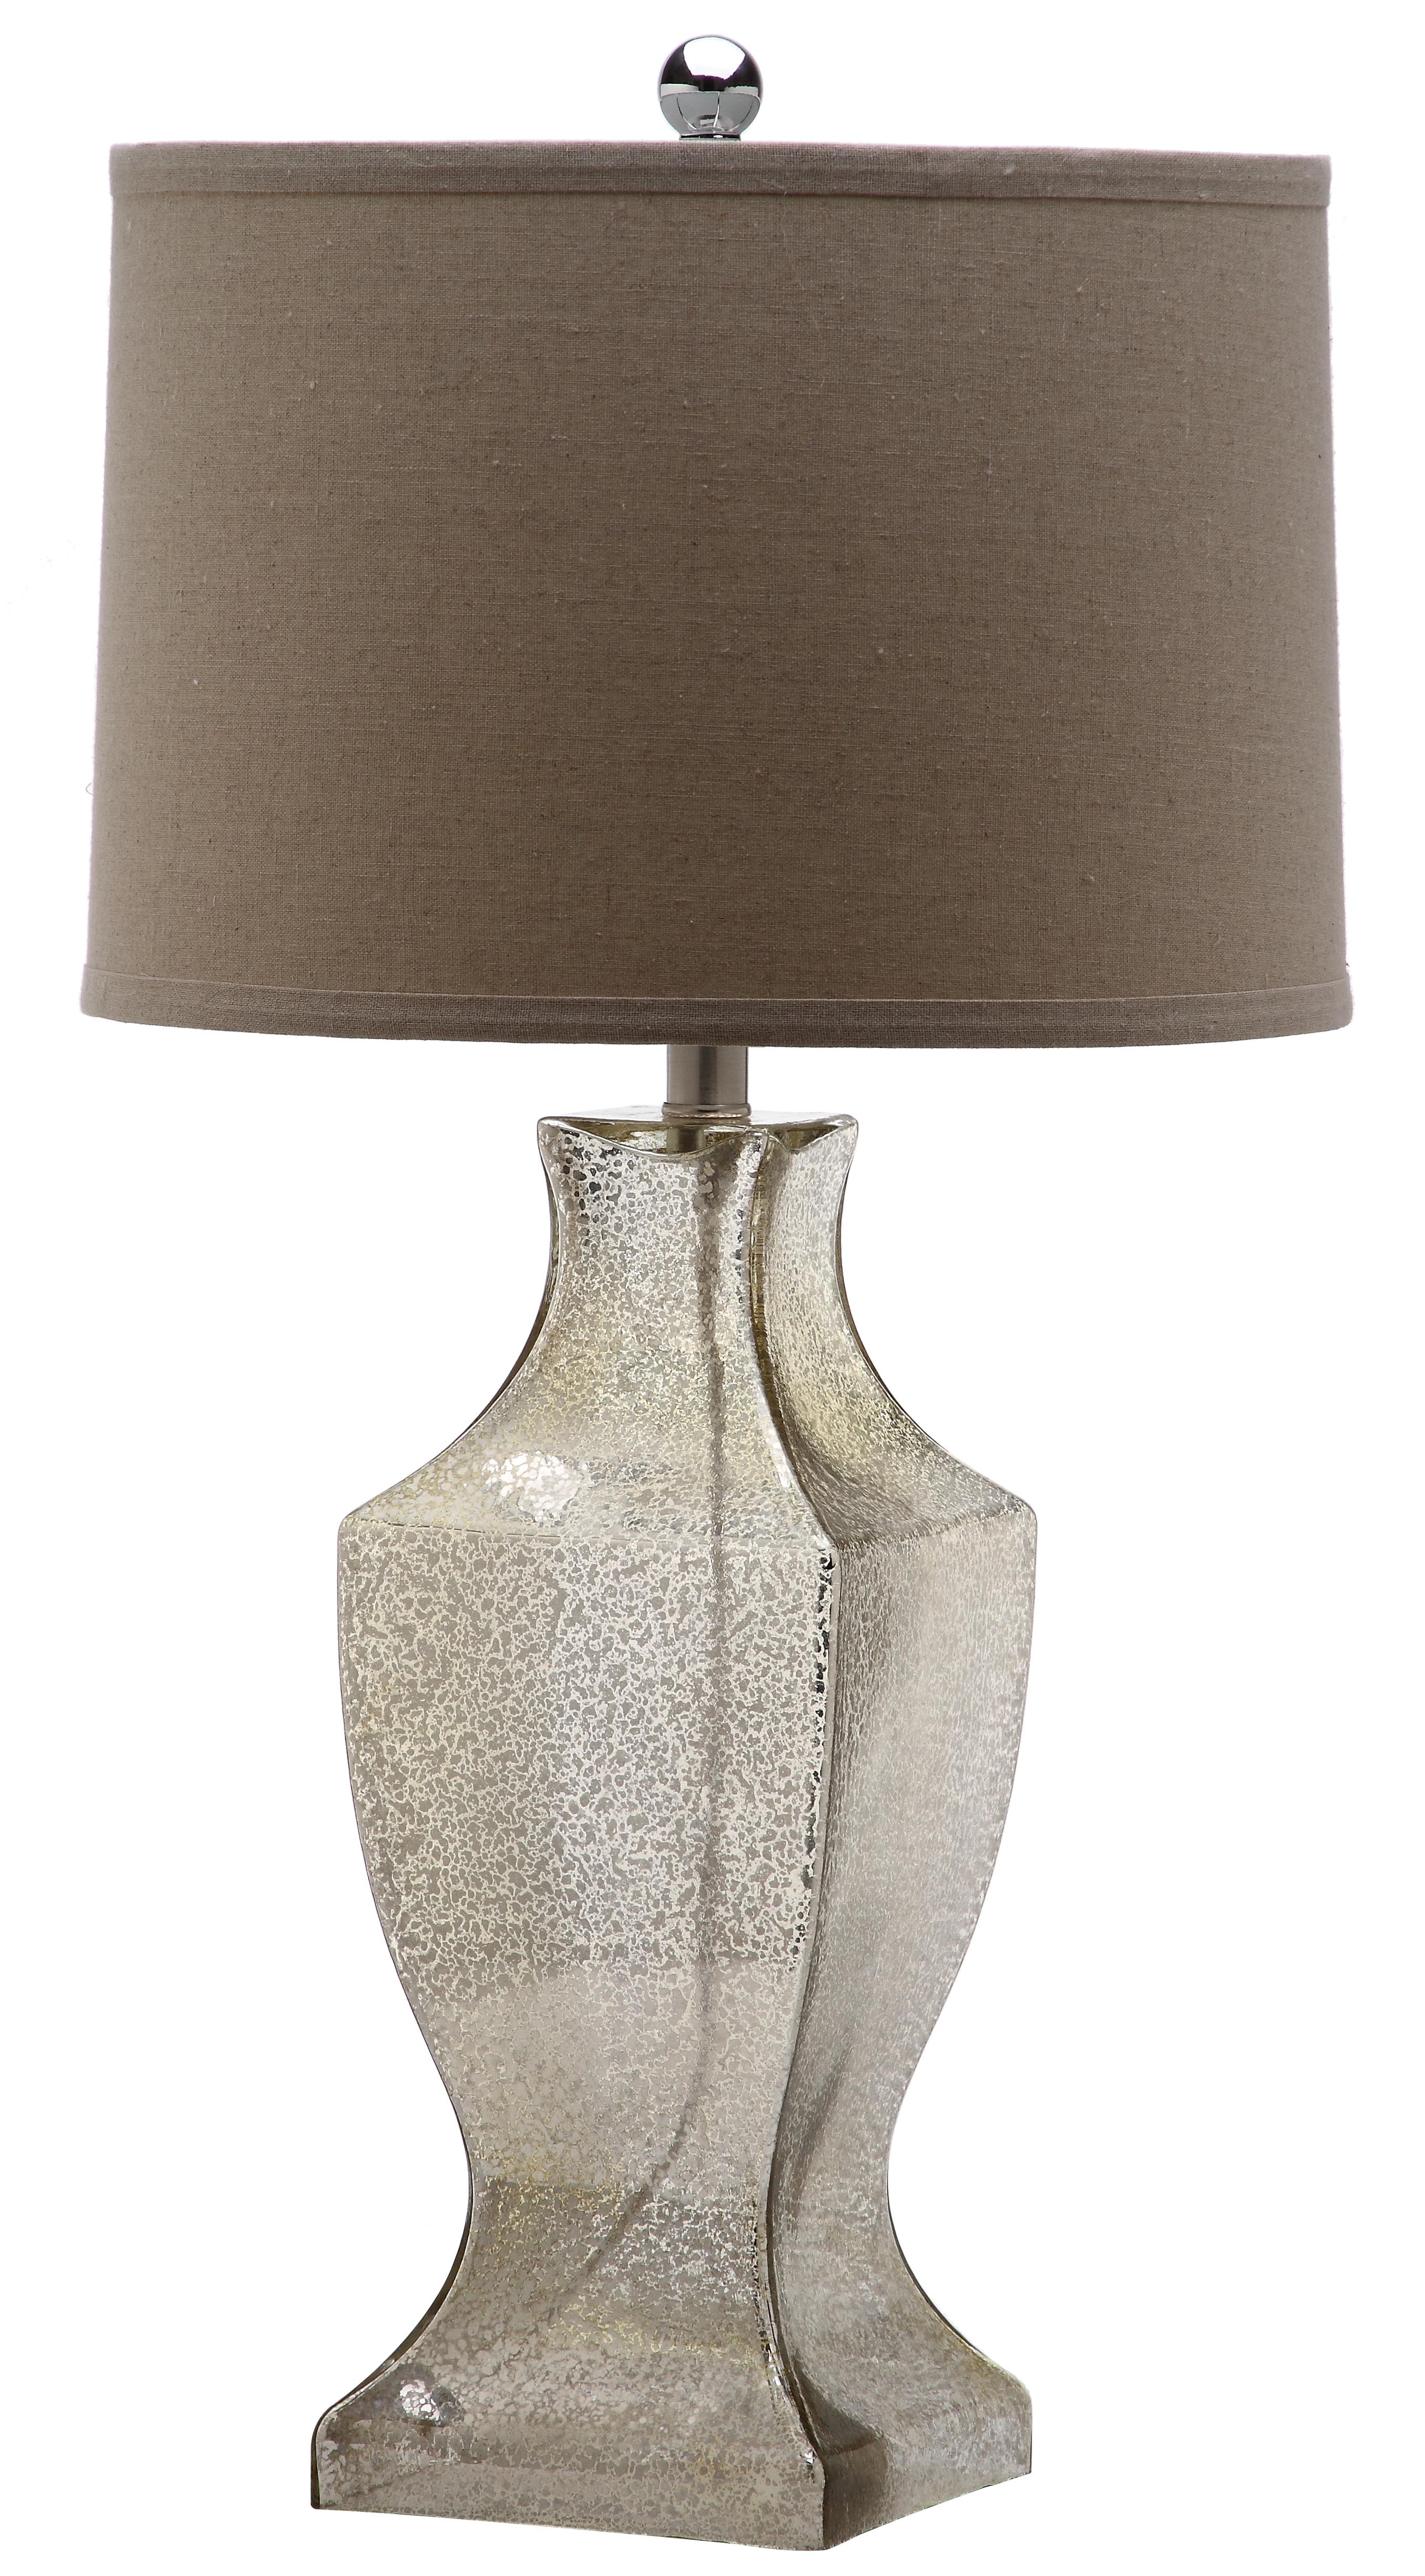 Glass 29-Inch H Bottom Table Lamp - Ivory/Silver - Arlo Home - Image 1